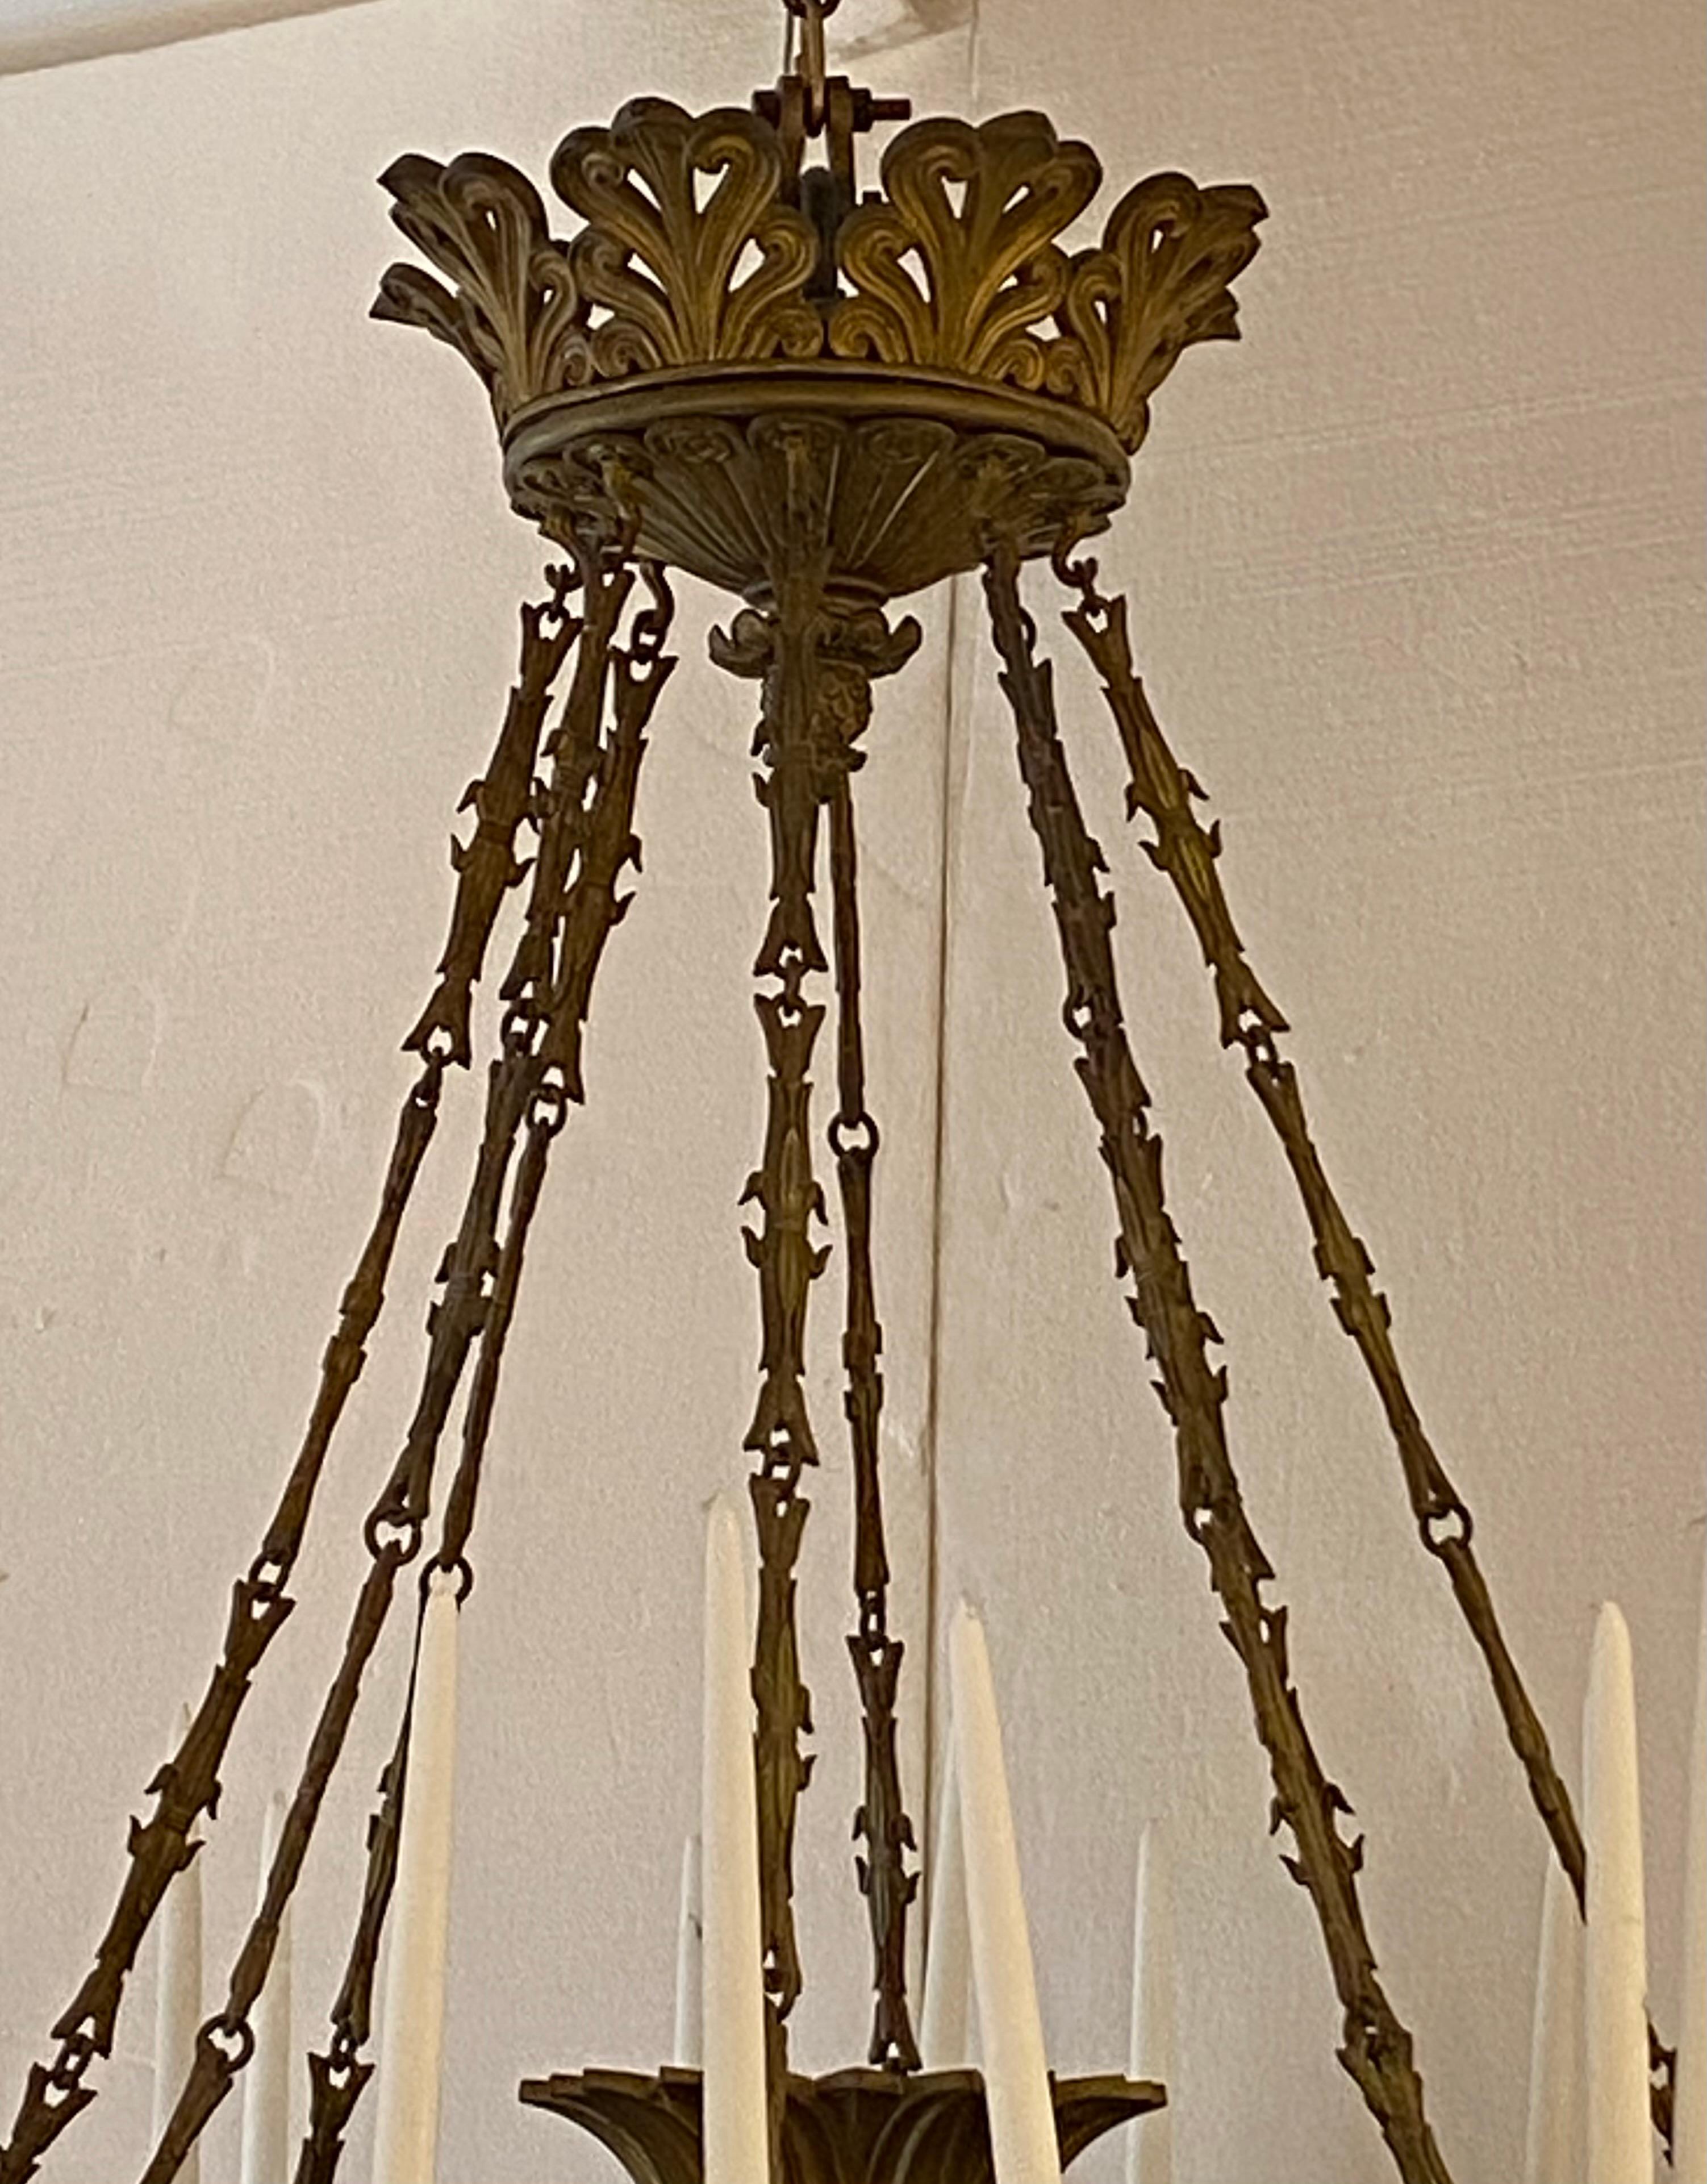 Antique bronze chandelier, from 1950's with non-electrified with 24 candle holder chandelier was in
 Ex-Vice-president Dan Quayle office in 1989.
 